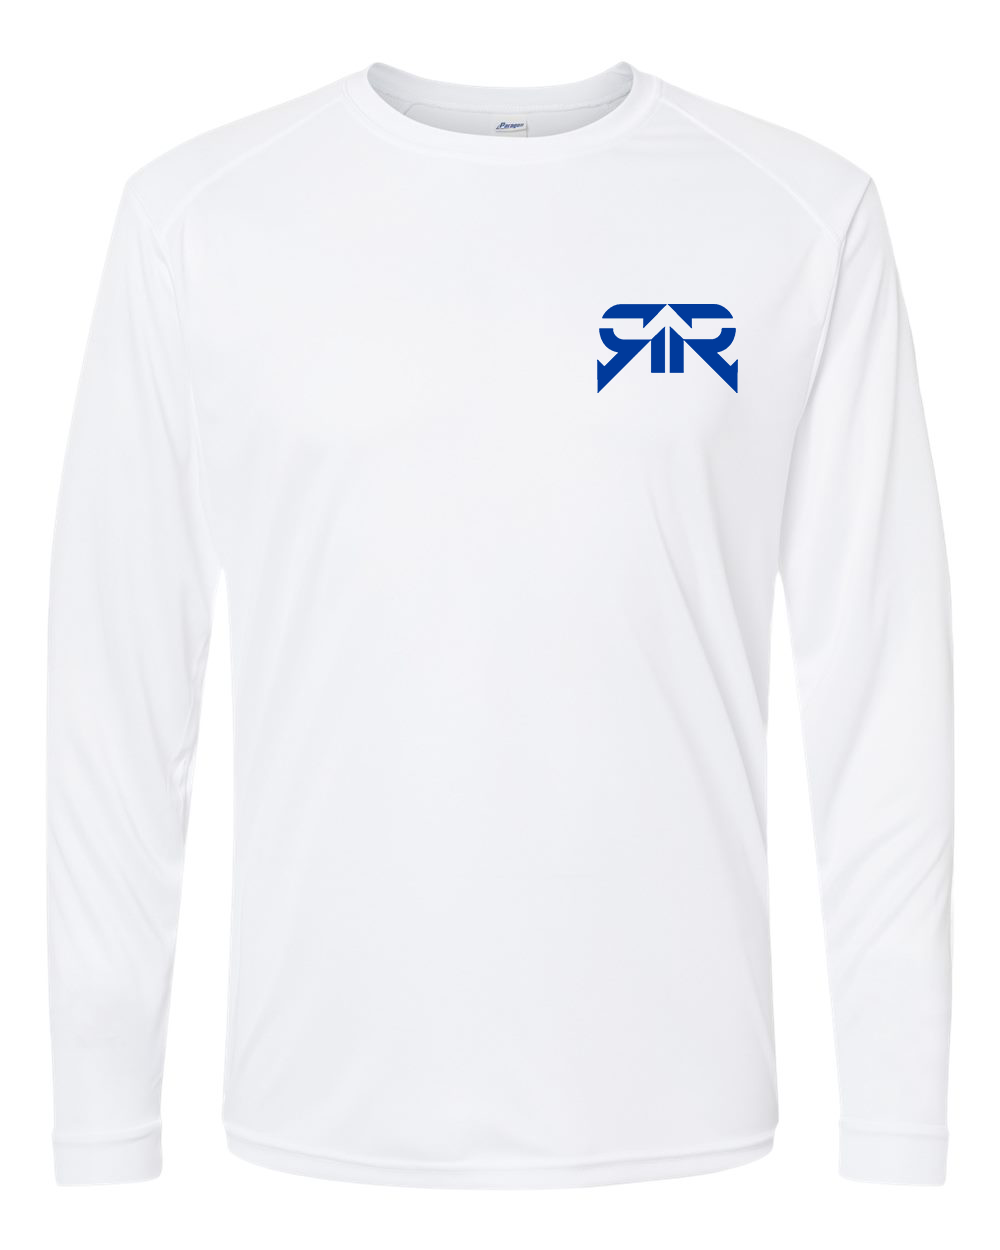 The End Result - Long Sleeve Dri Fit